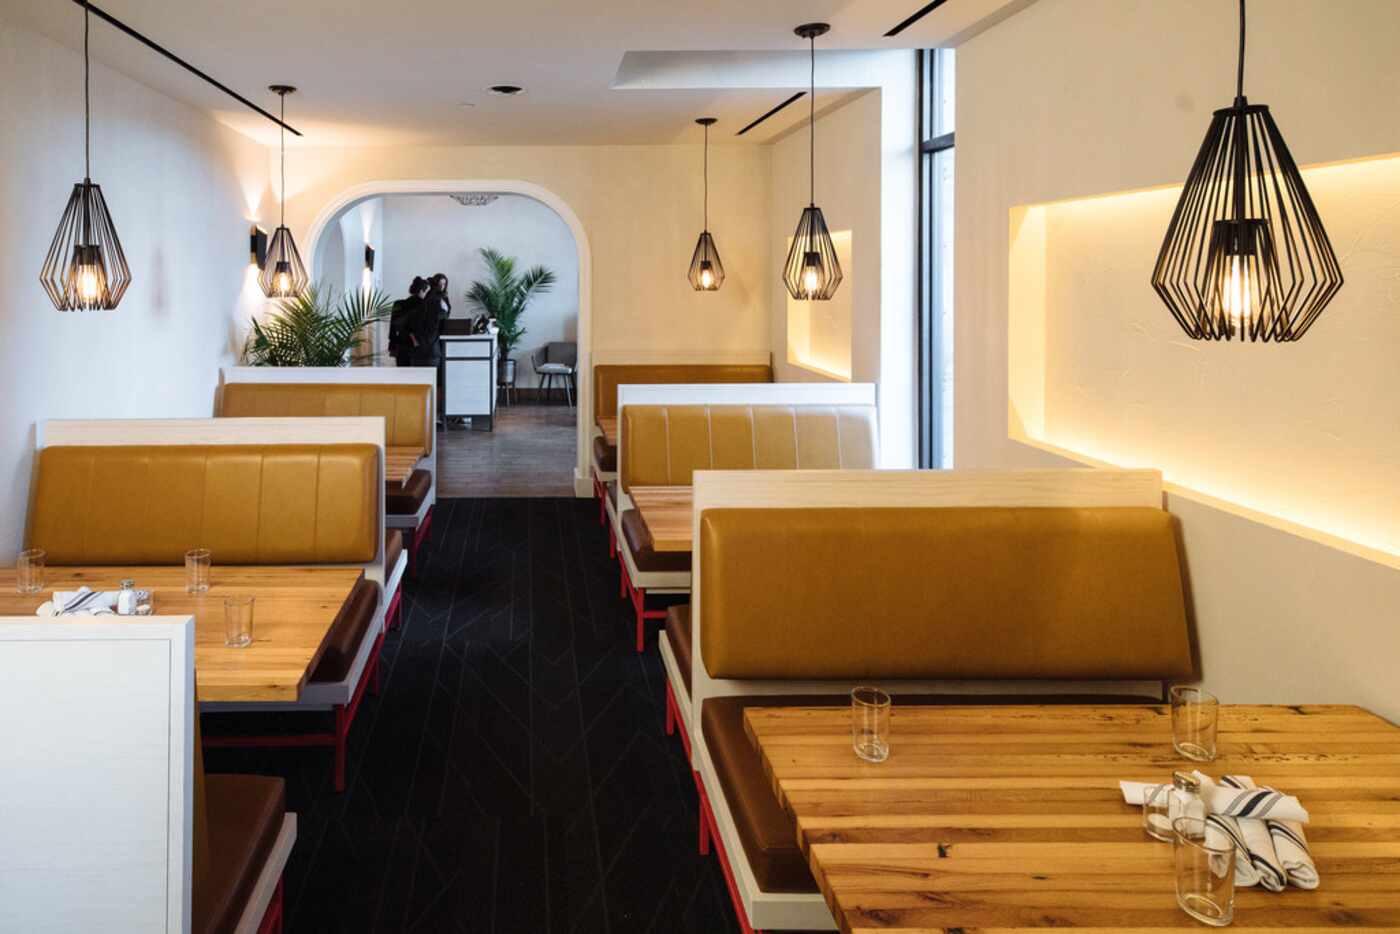 The design team behind Jalisco Norte was inspired to create a casual and memorable space. 